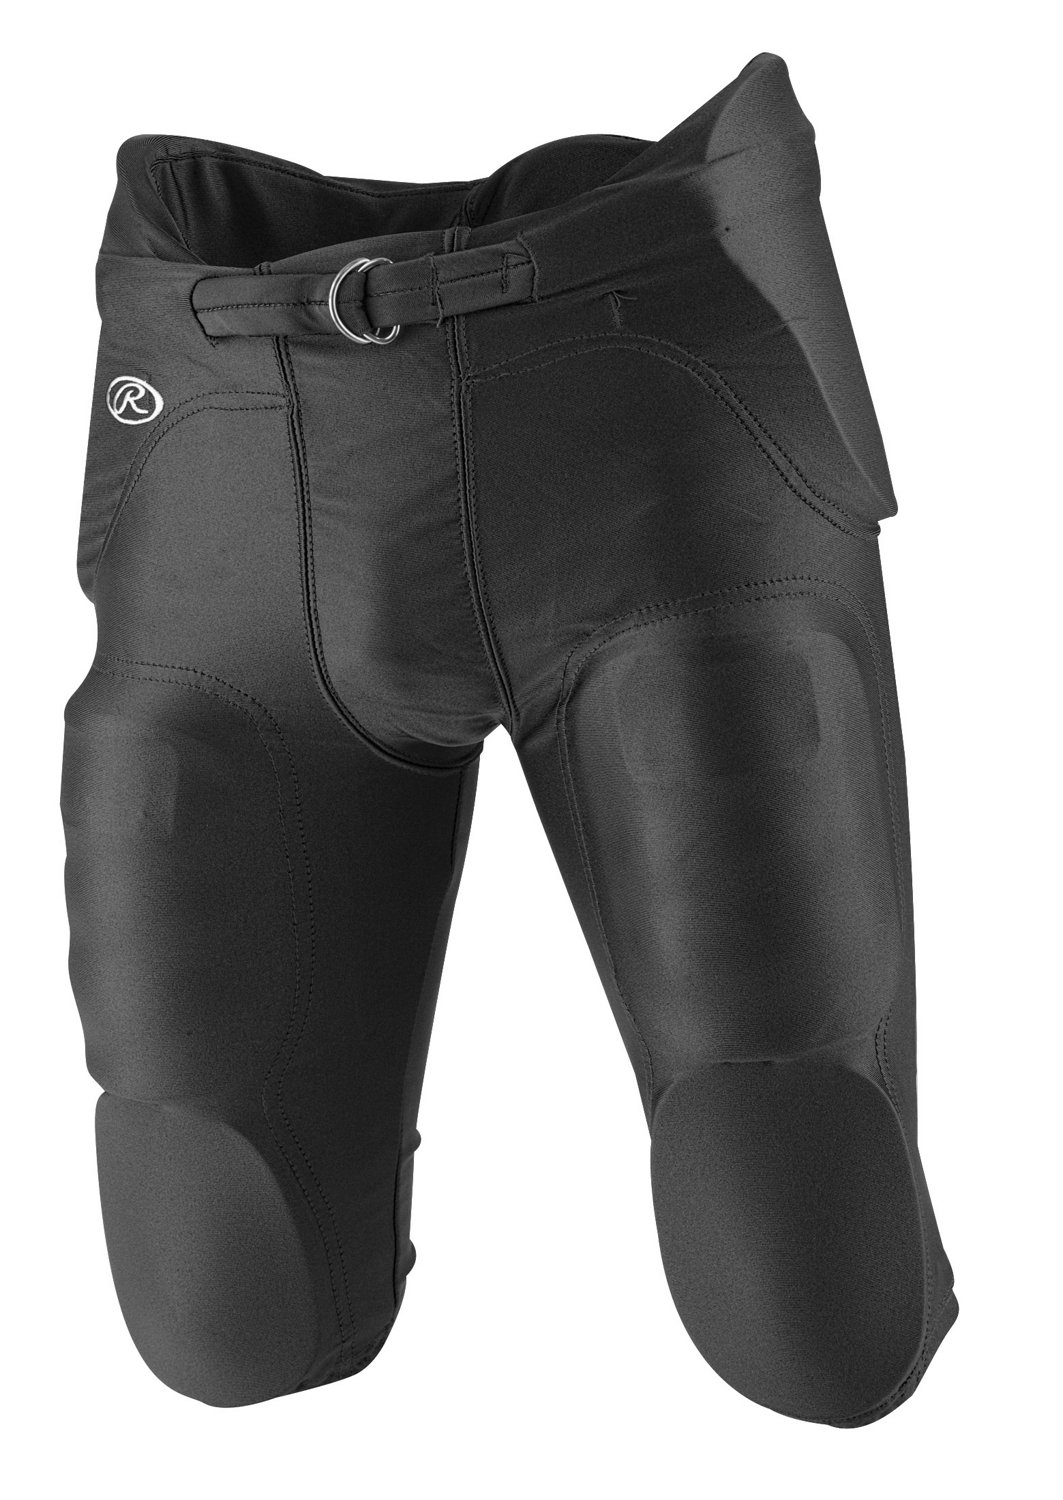 academy sports youth football pants